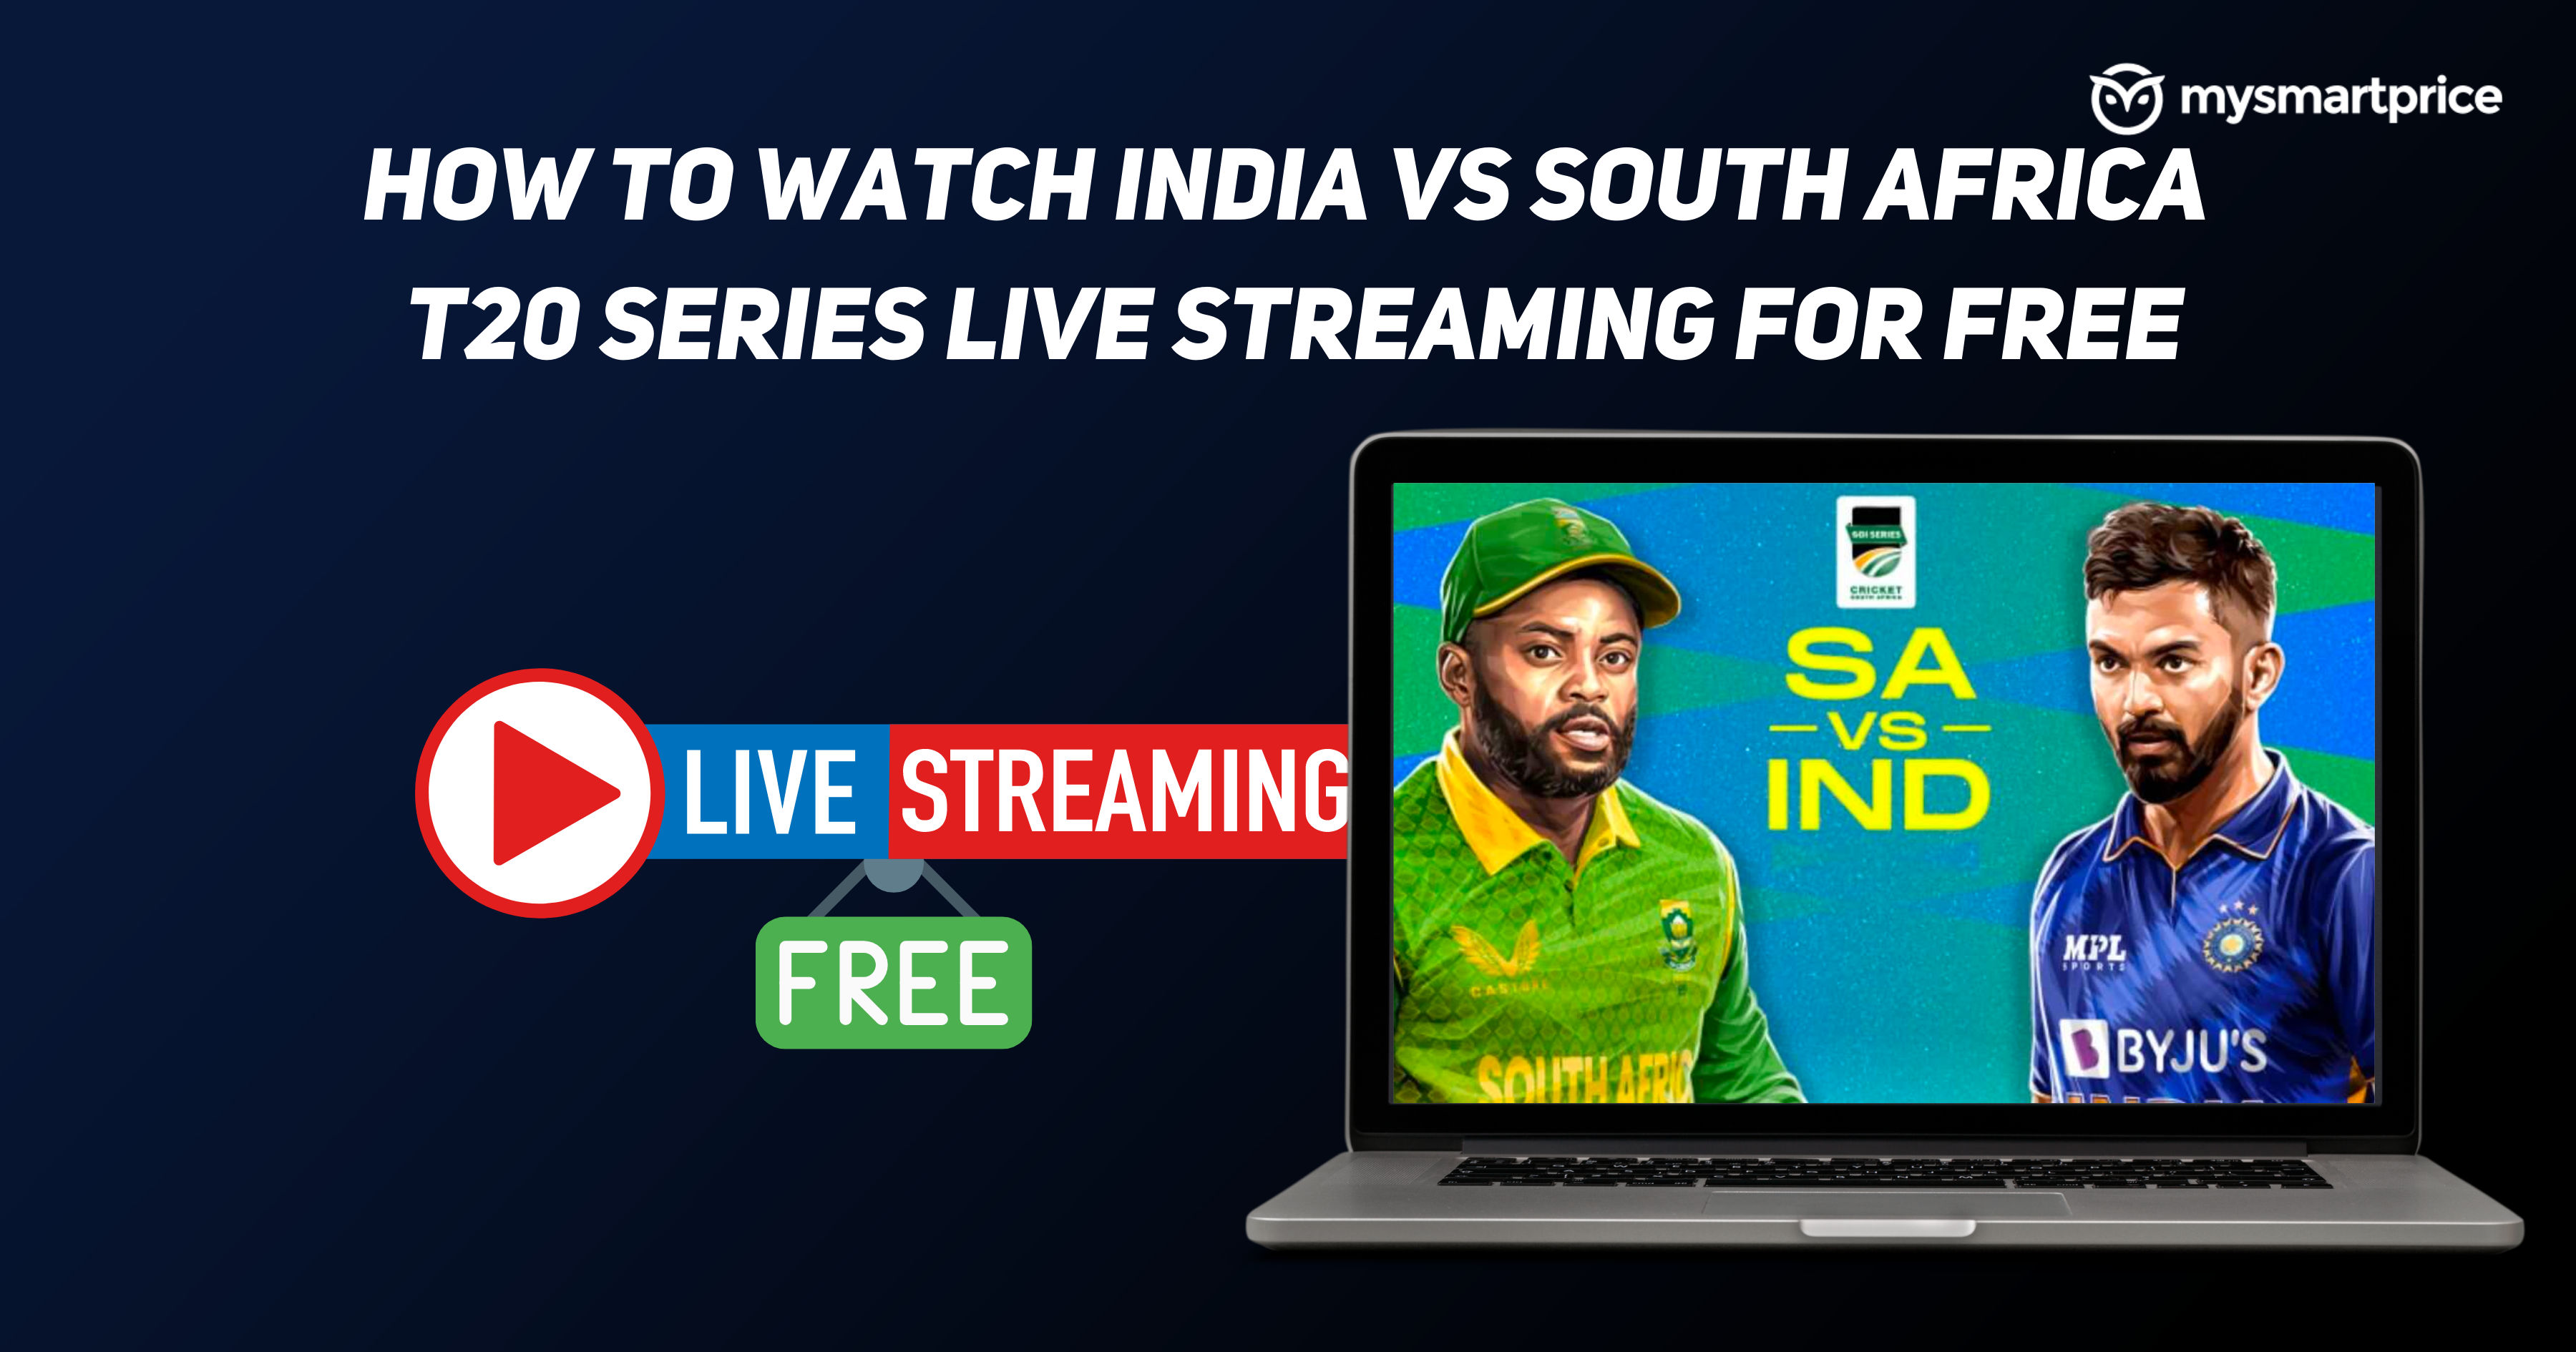 India vs South Africa Final T20 Match Live Streaming Free and TV Channels List How to Watch on Mobile and Live Telecast on TV